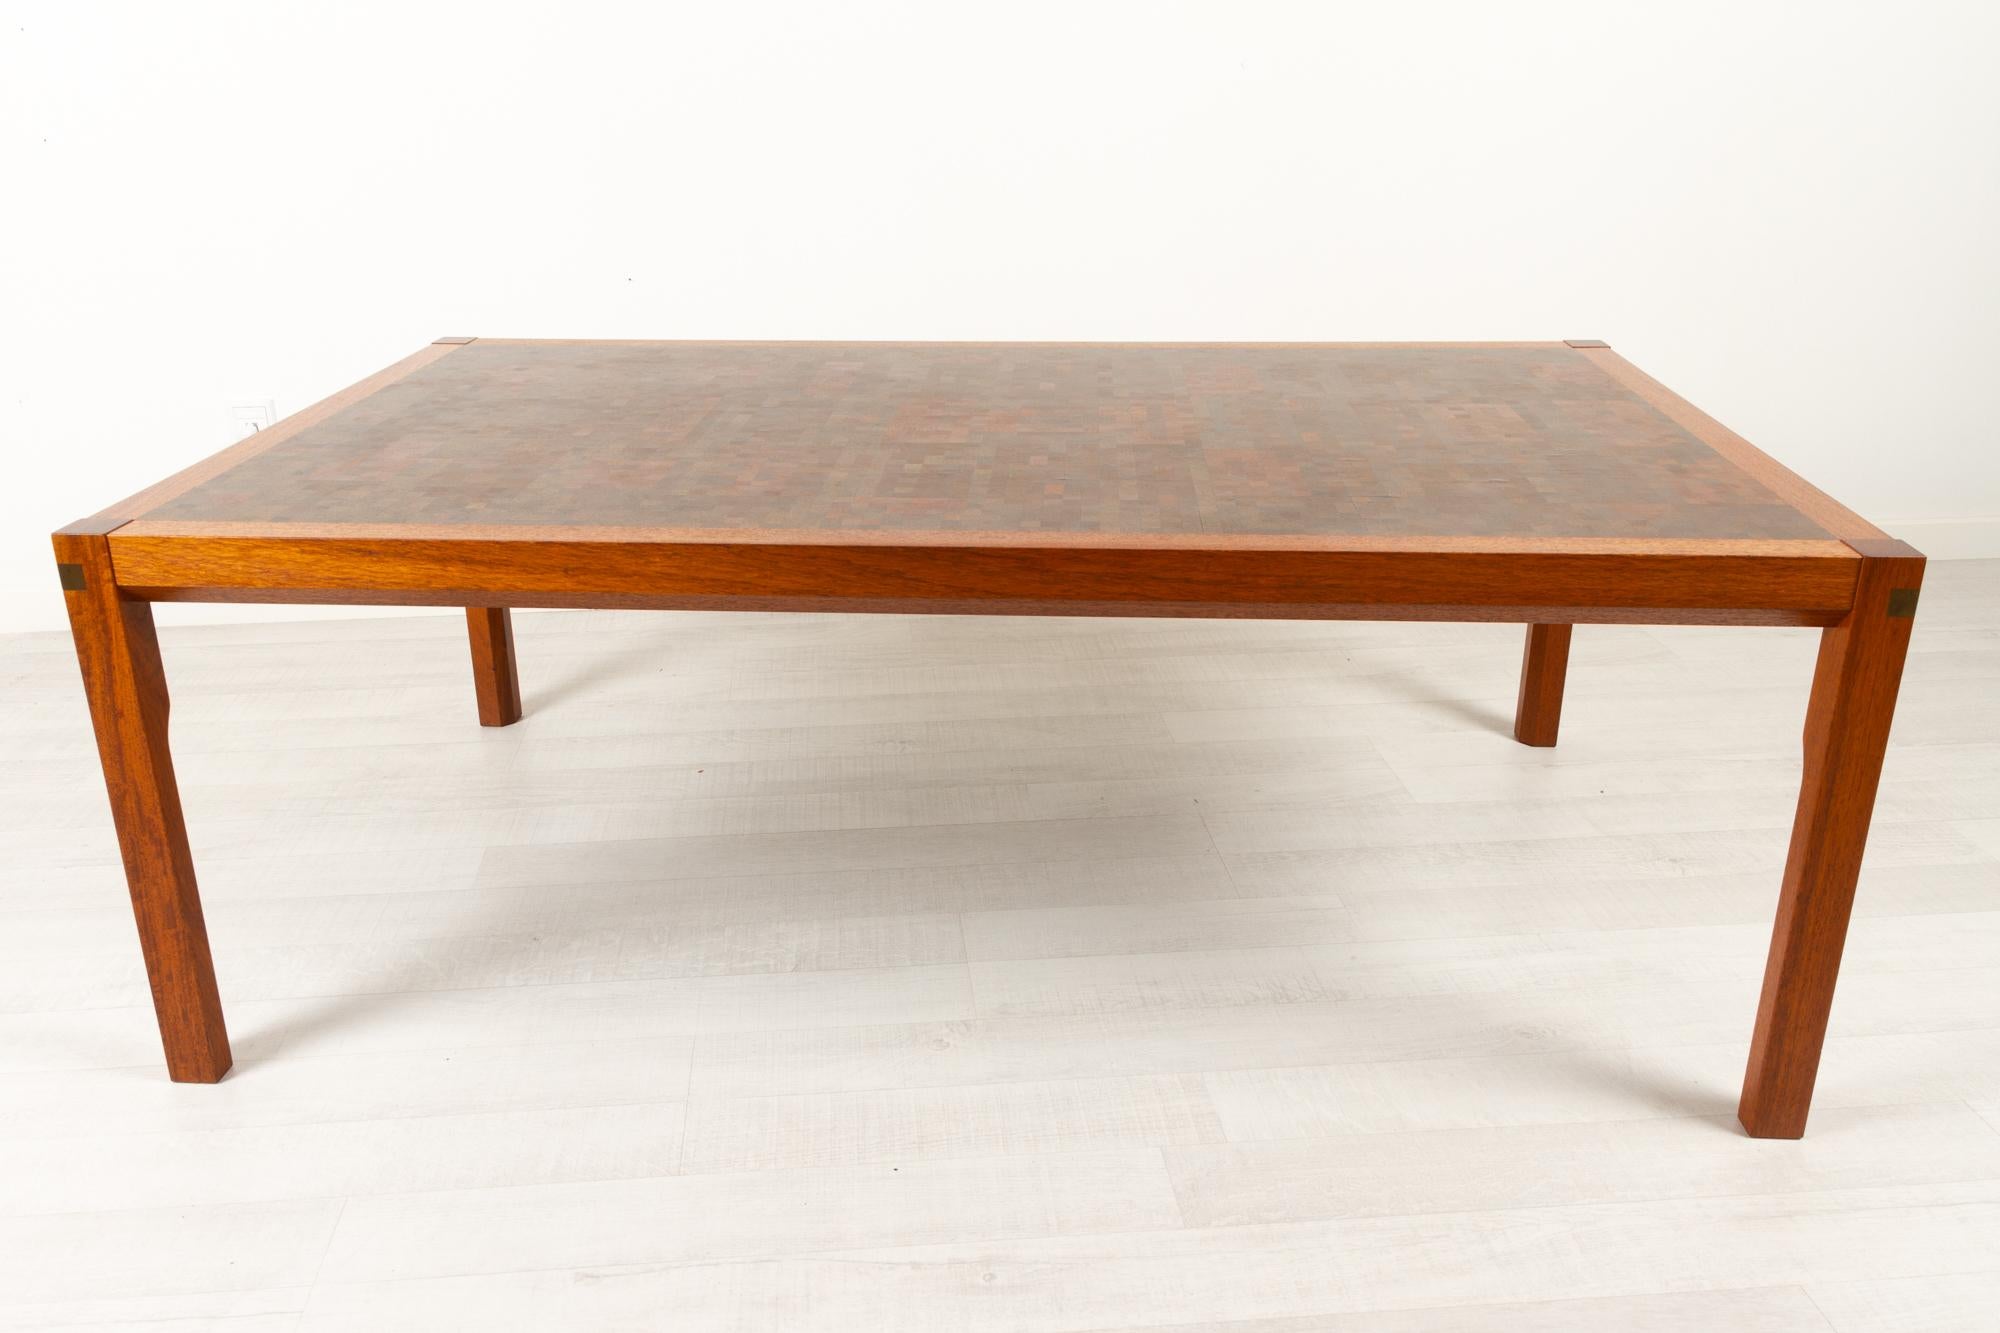 Danish modern tranekær coffee table, 1970s
Designed by Rolf Middelboe og Gorm Lindum for Tranekaer Møbler in the 1970s.
Large handcrafted table with frame and legs in solid teak with bevelled edges. Top is made from hundreds of small blocks of